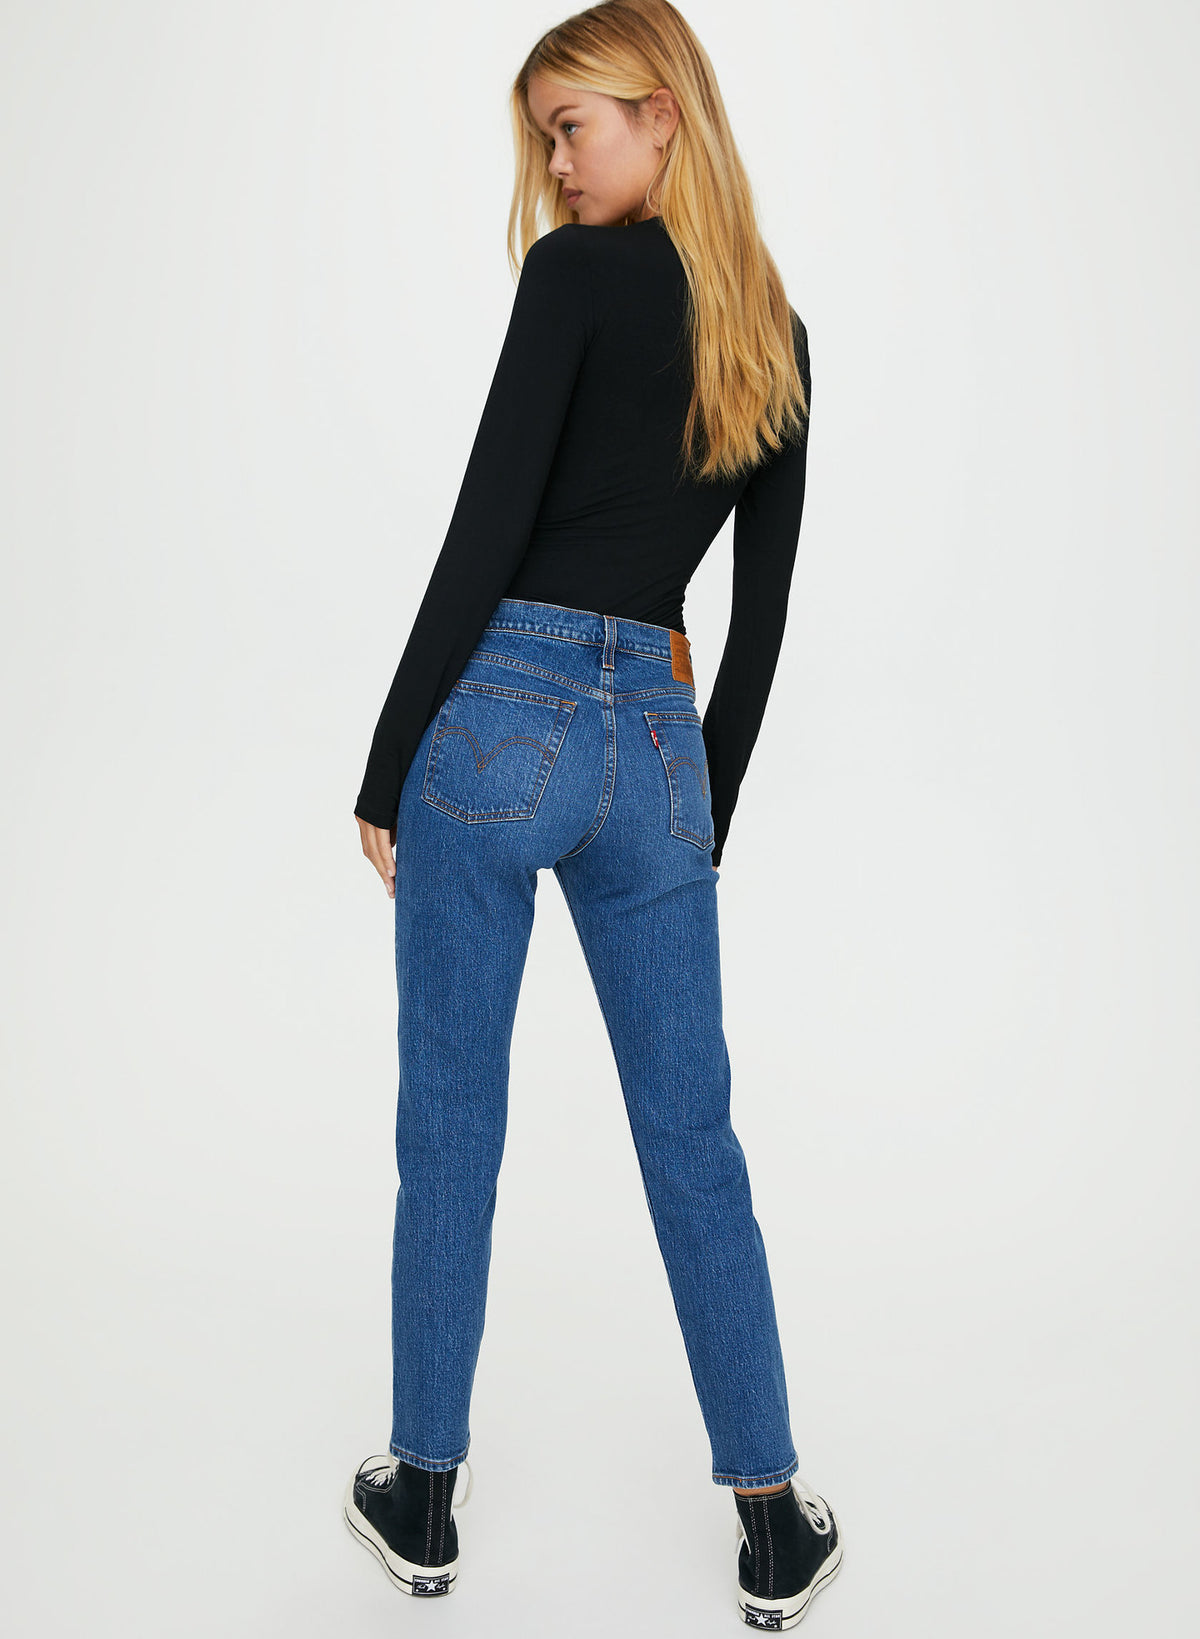 Levi's Wedgie: Charleston Moves | Jean Theory: